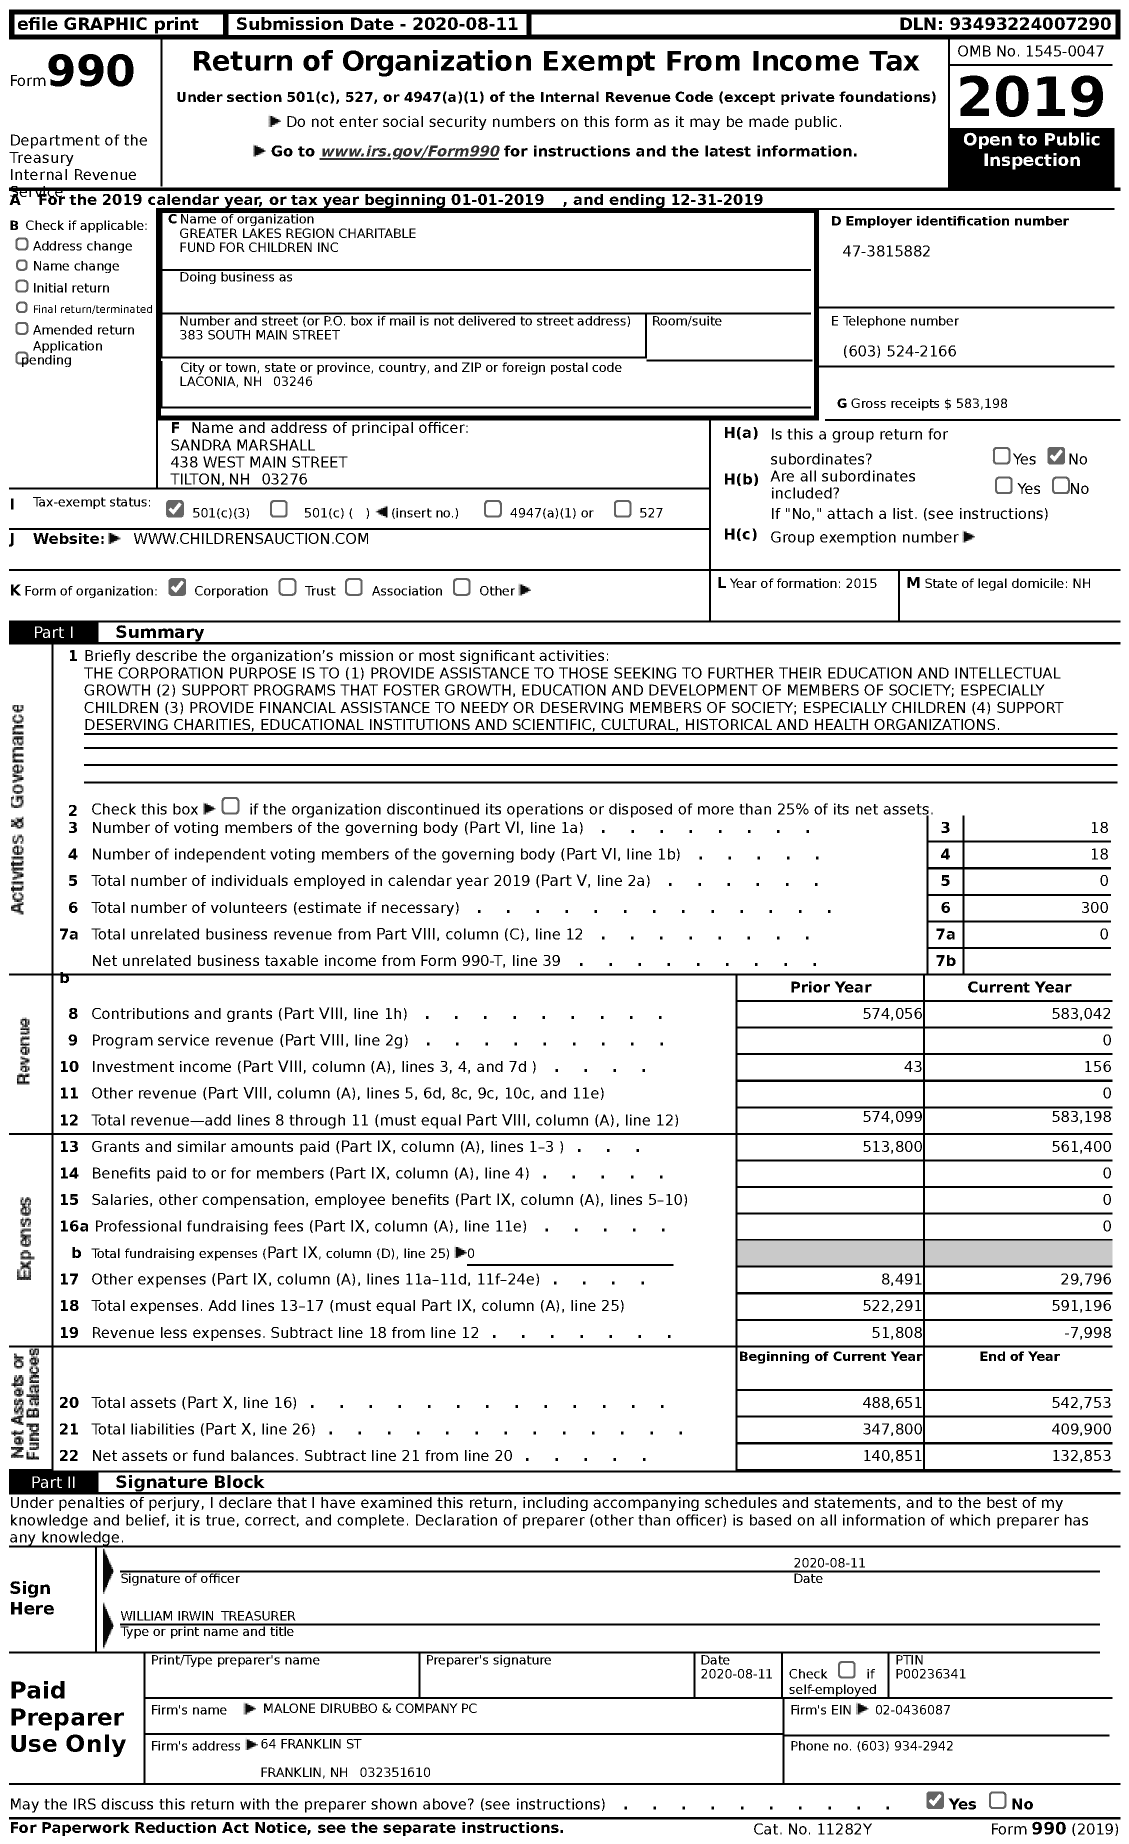 Image of first page of 2019 Form 990 for Greater Lakes Region Charitable Fund for Children